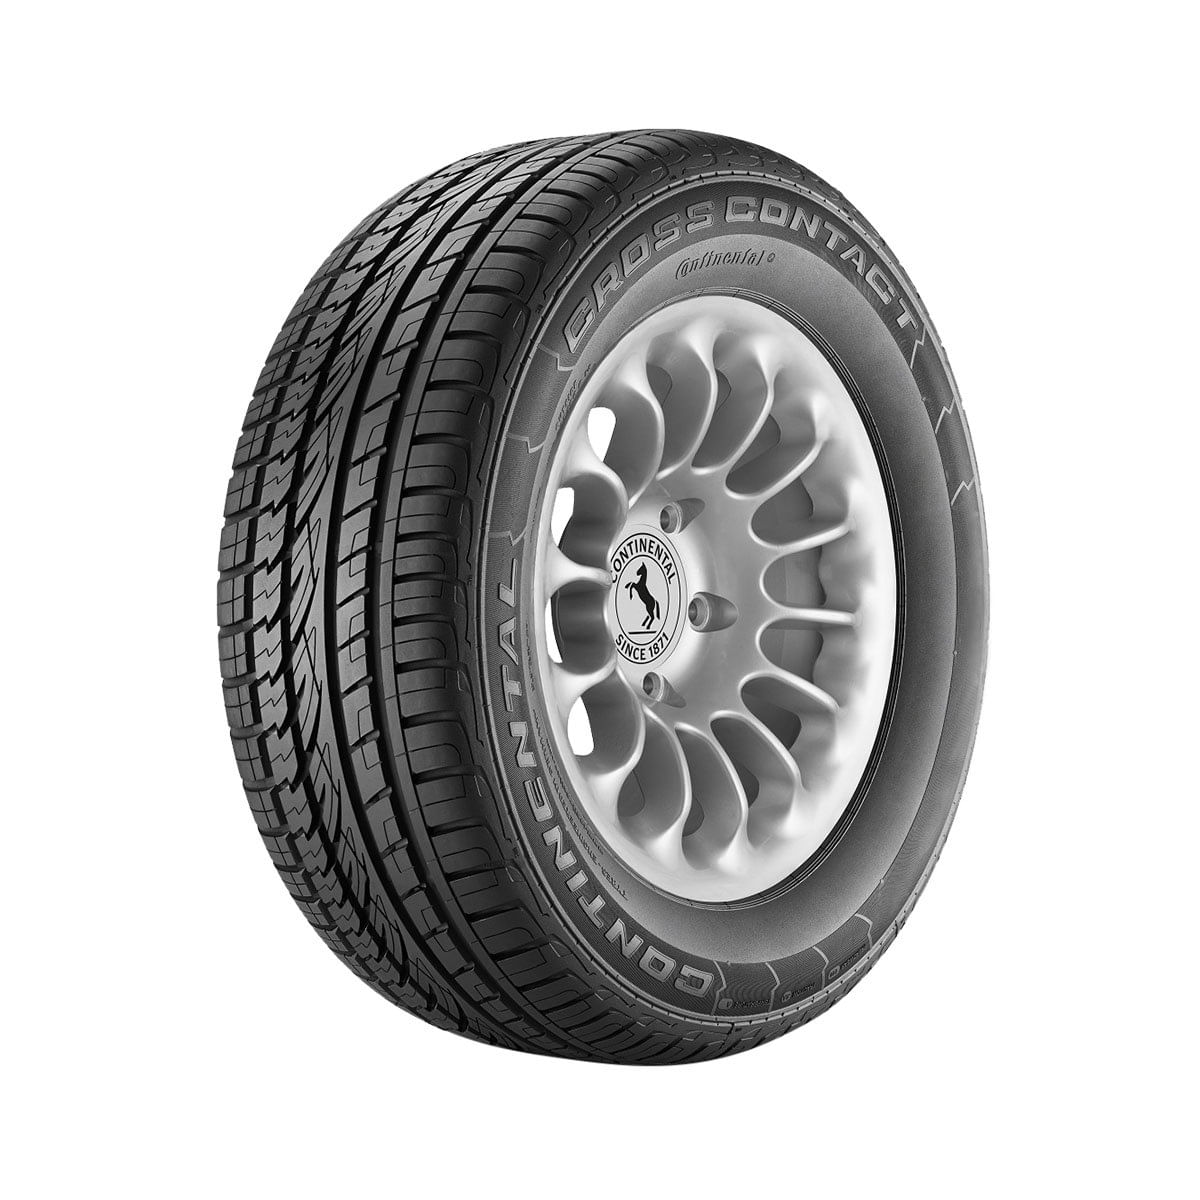 5745039_Pneu Aro 17 235/65 R 17 Continental CrossContact UHP 4711440000_1_Zoom